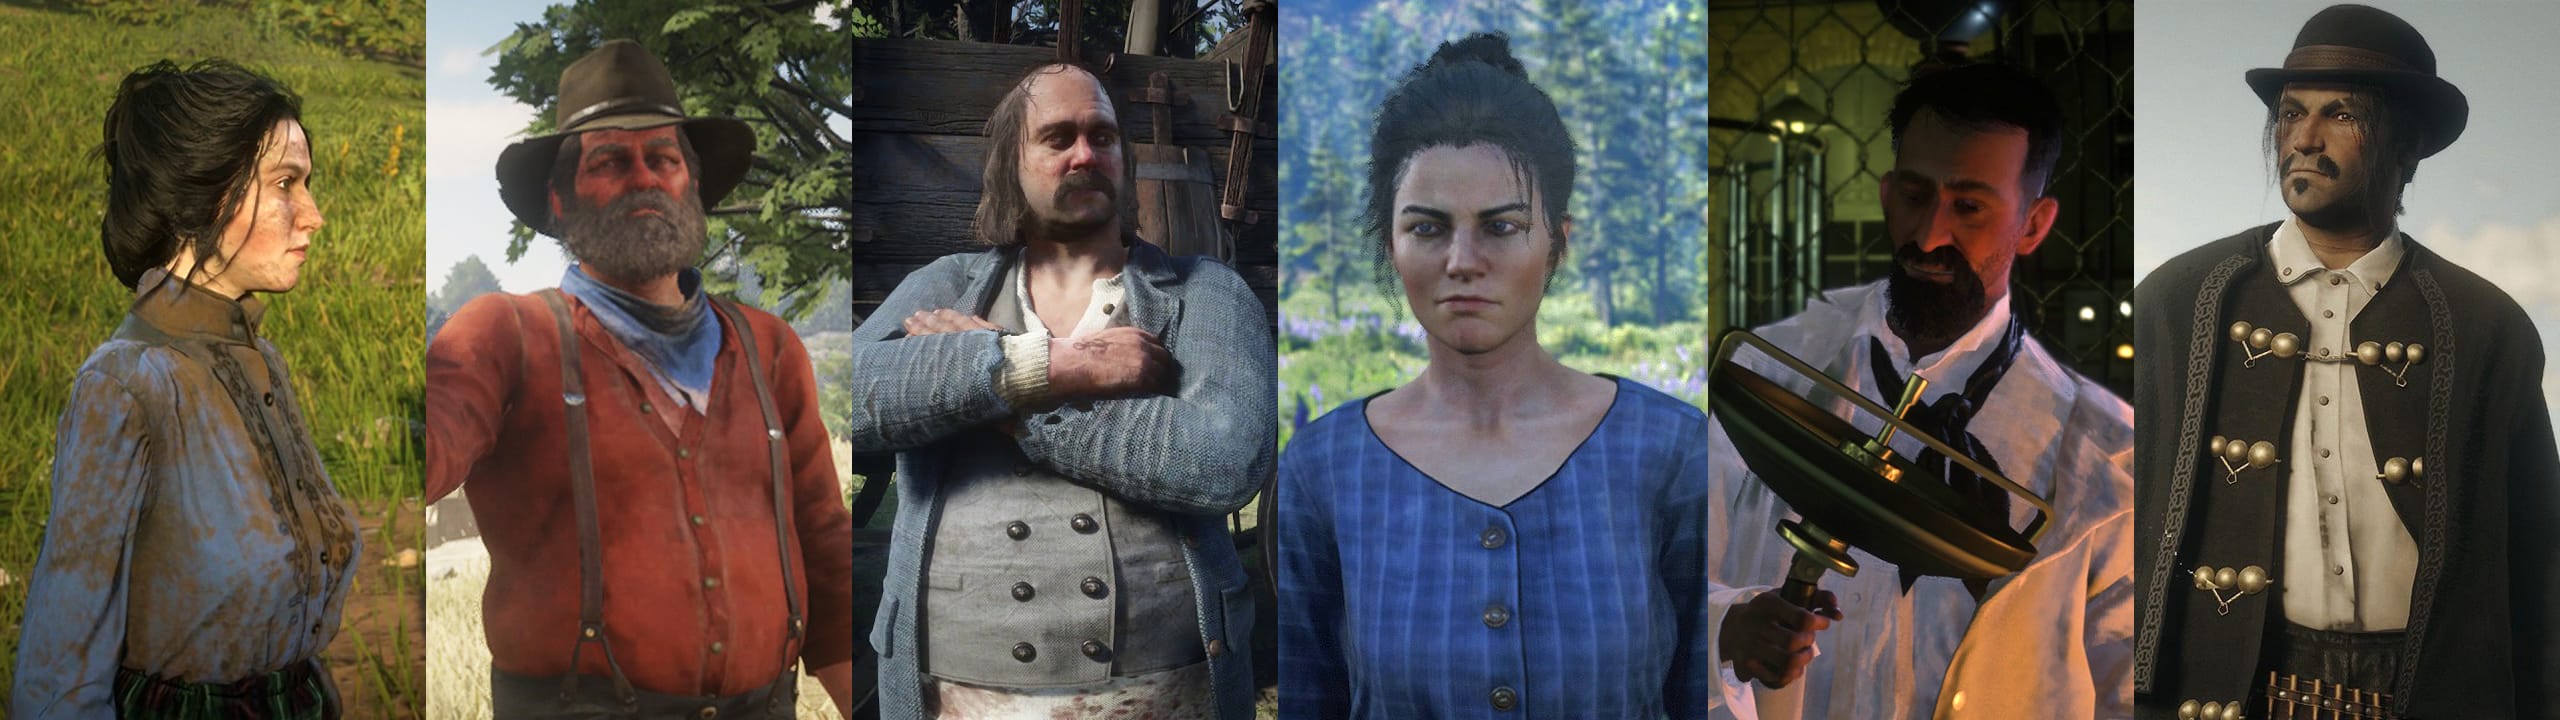 Red dead Redemption 2 Characters